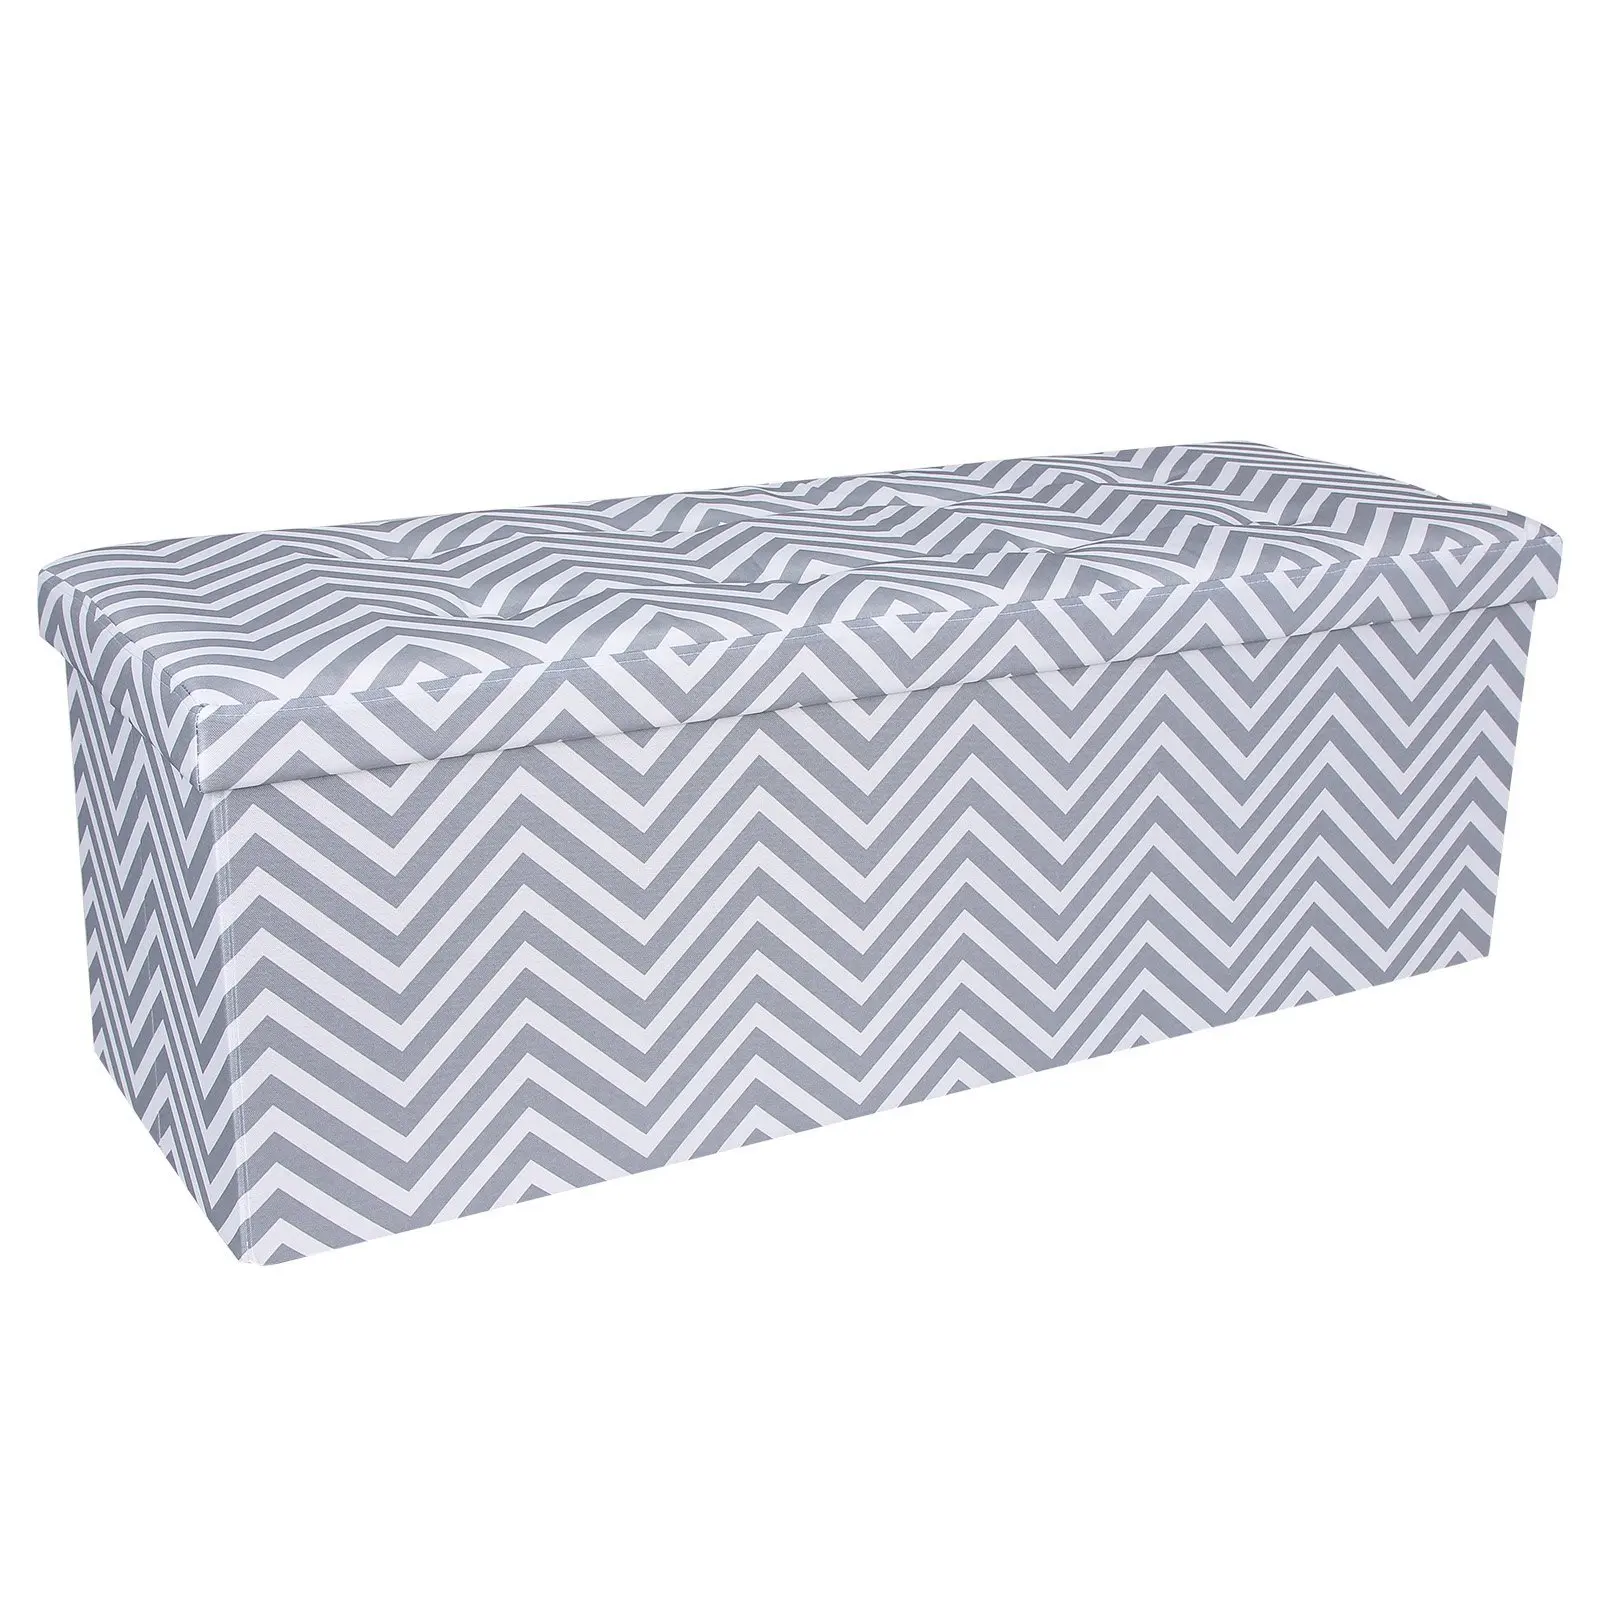 Cheap Bench Seat Ottoman, find Bench Seat Ottoman deals on line at